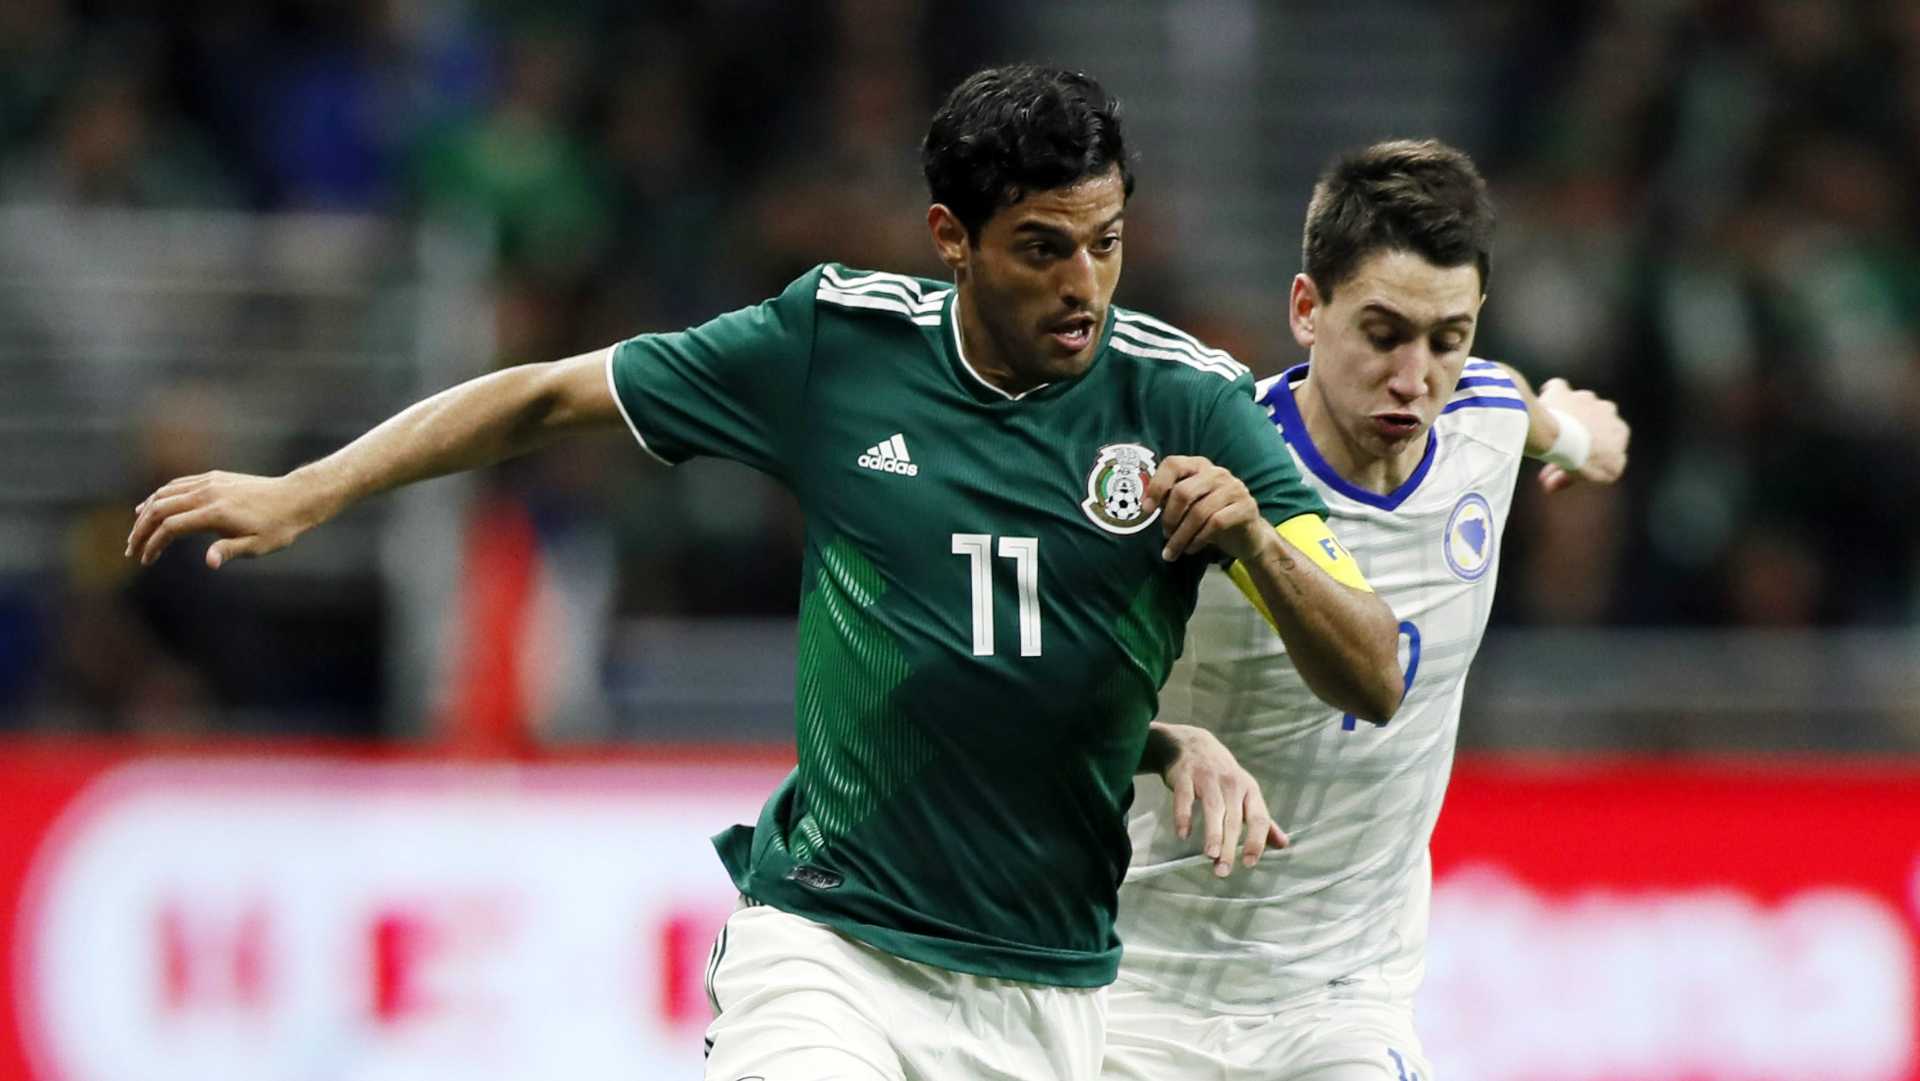 Mexico vs Iceland: Live stream, starting lineup, kickoff time & match preview | Goal.com